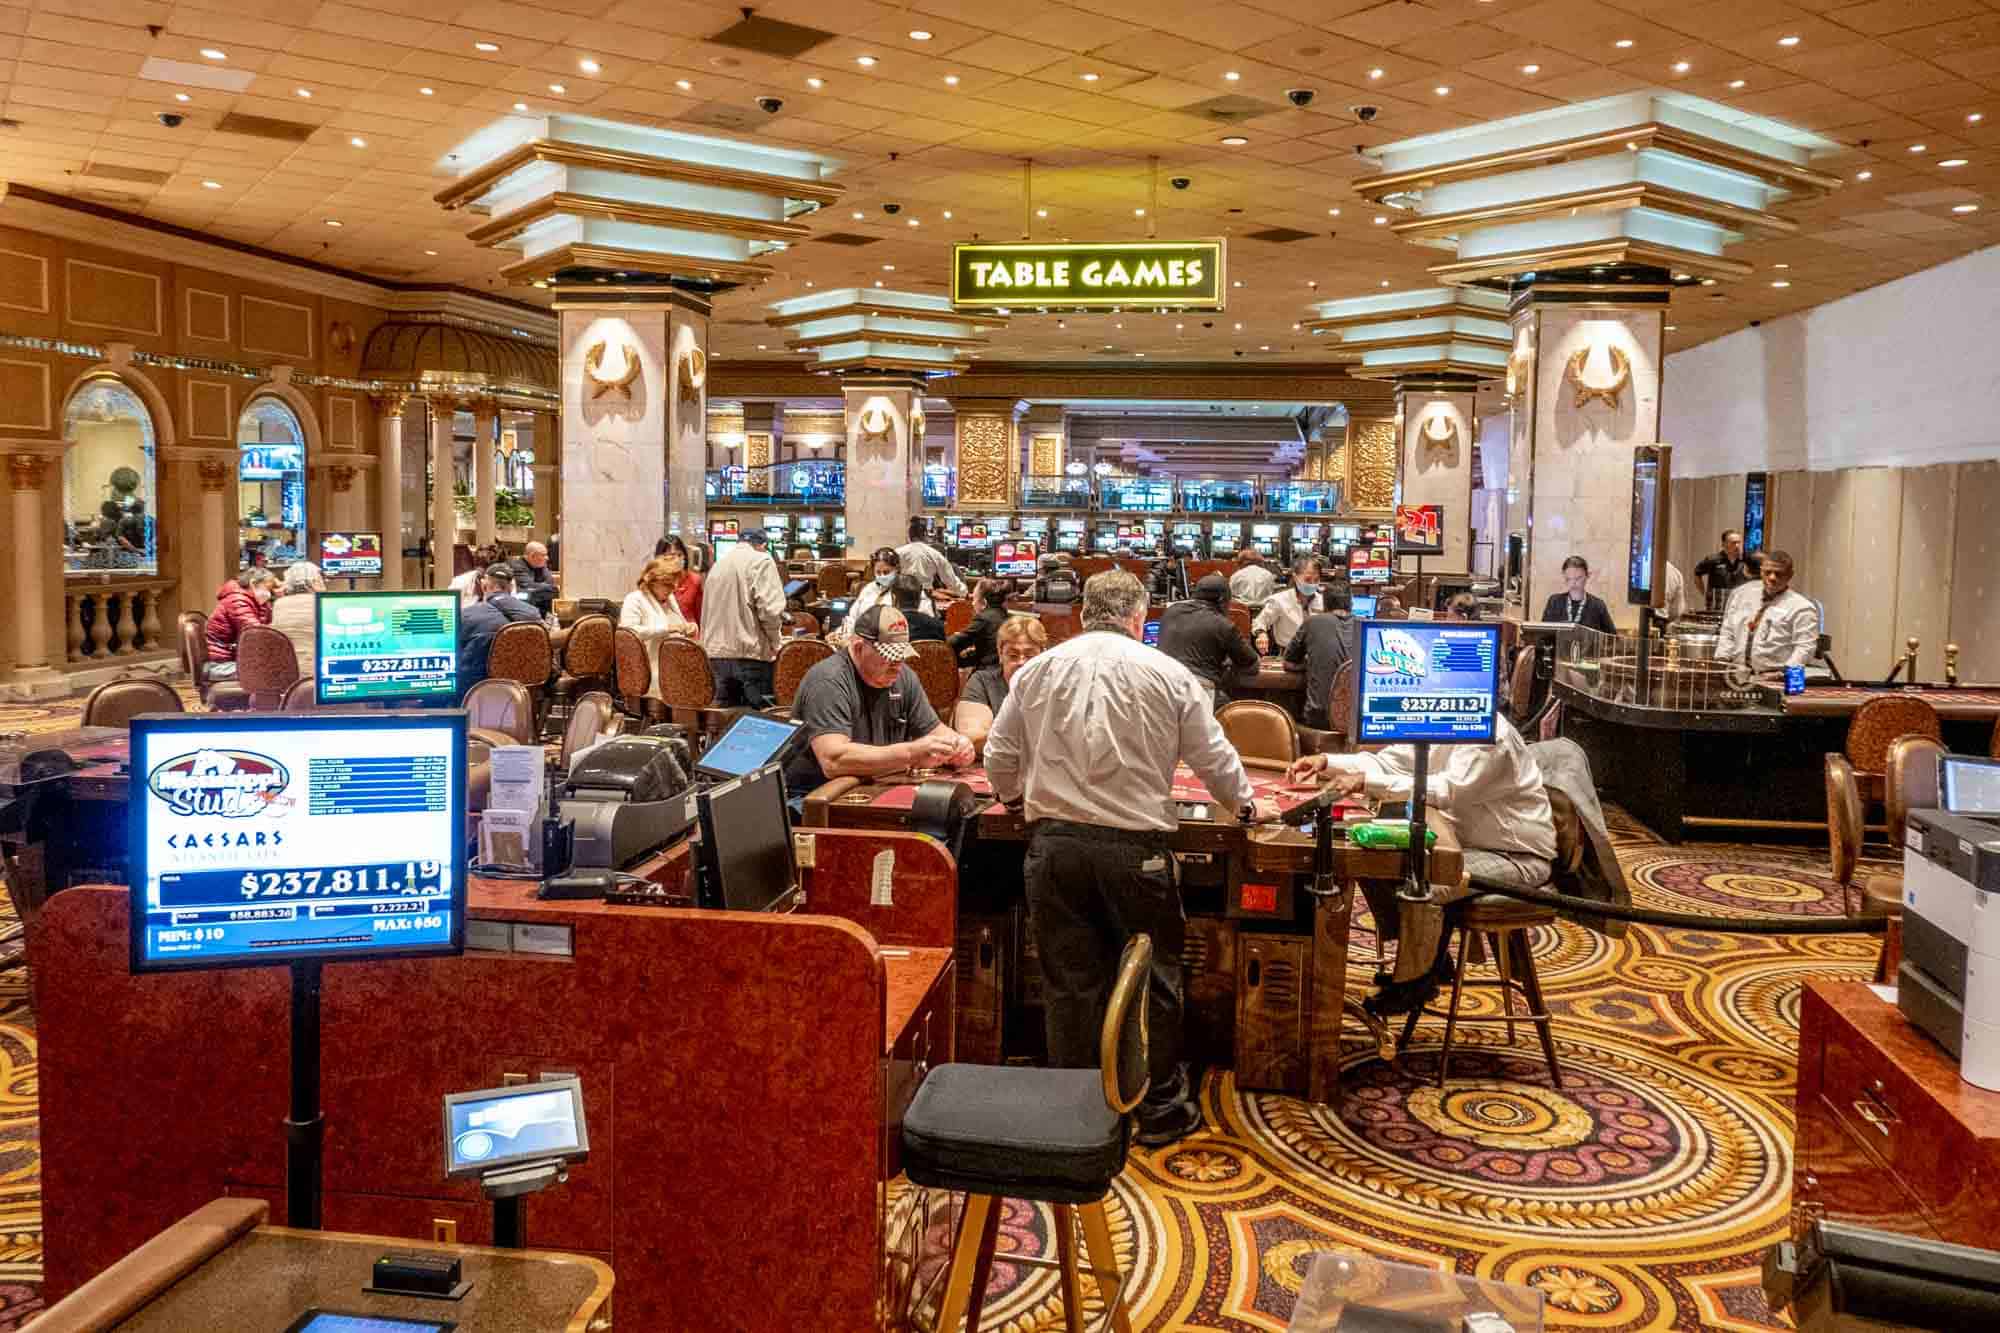 People sitting at game tables in a casino under a sign for "table games"